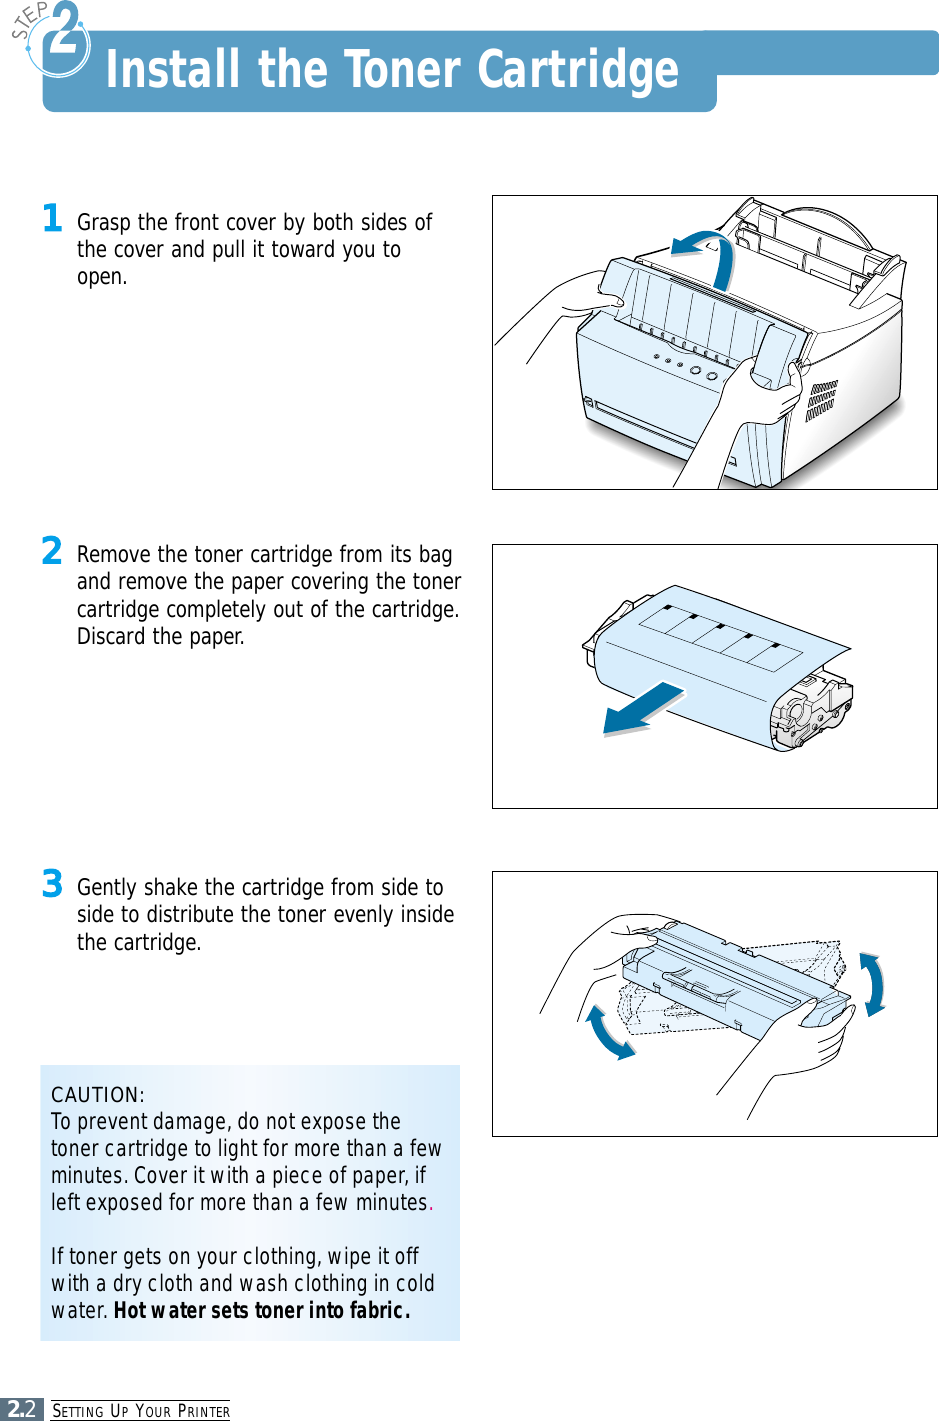 SETTING UPYOUR PRINTER2.21Grasp the front cover by both sides ofthe cover and pull it toward you toopen.2Remove the toner cartridge from its bagand remove the paper covering the tonercartridge completely out of the cartridge.Discard the paper.3Gently shake the cartridge from side toside to distribute the toner evenly insidethe cartridge.CAUTION:To prevent damage, do not expose thetoner cartridge to light for more than a fewminutes. Cover it with a piece of paper, ifleft exposed for more than a few minutes.If toner gets on your clothing, wipe it offwith a dry cloth and wash clothing in coldwater. Hot water sets toner into fabric.Install the Toner Cartridge